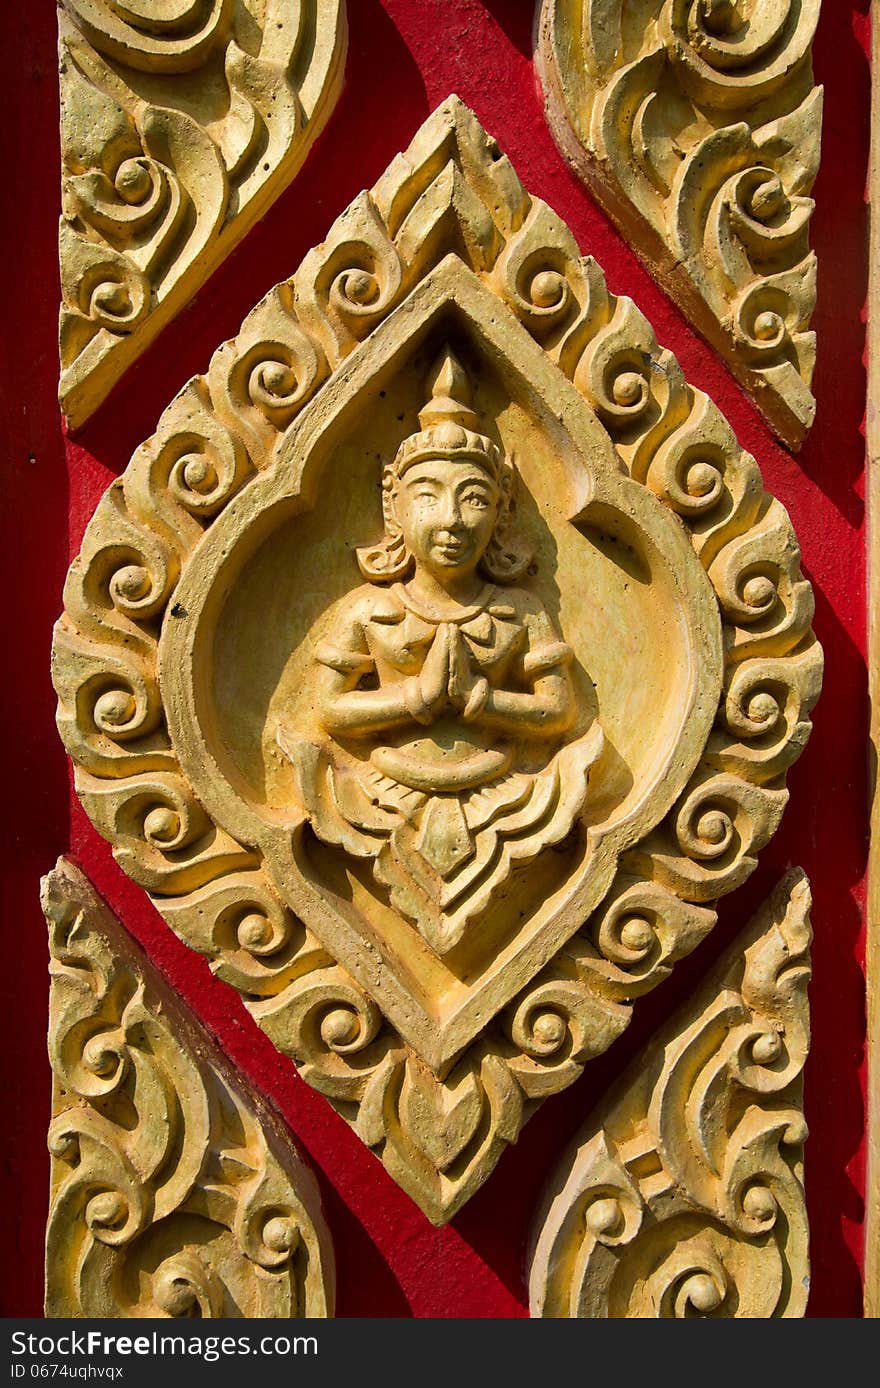 Sculpture on the wall of temple in Thailand. Sculpture on the wall of temple in Thailand.